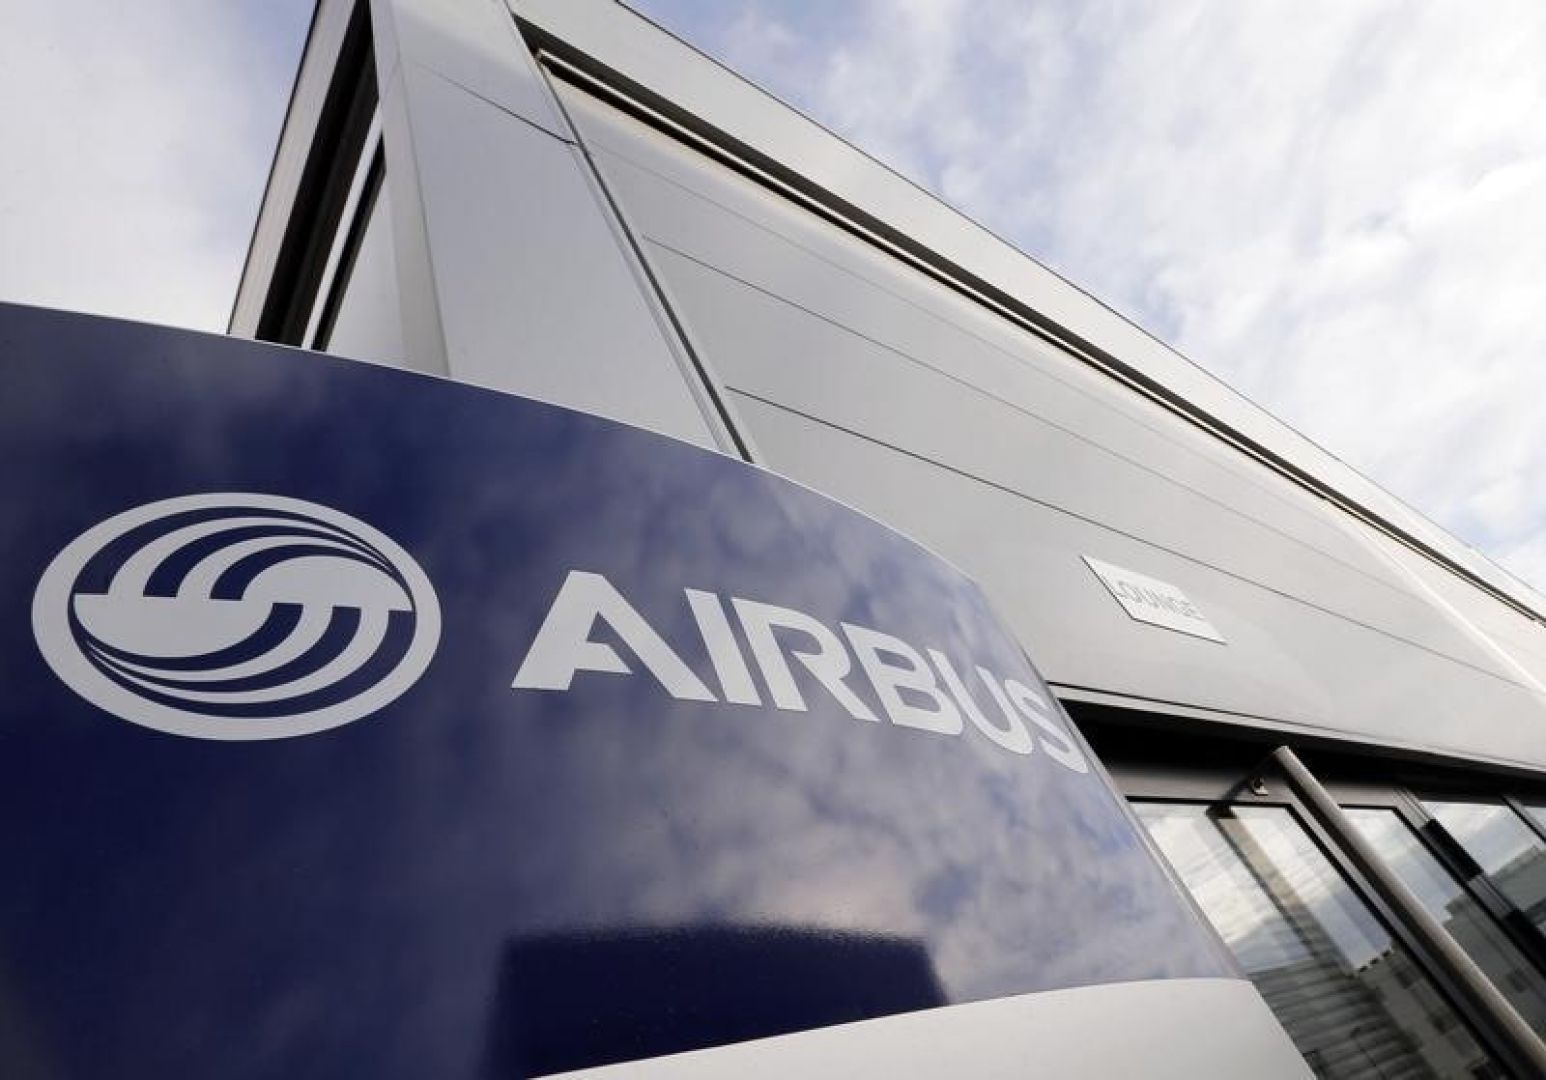 Airbus Says US Grants License for Planes in Iran Deal